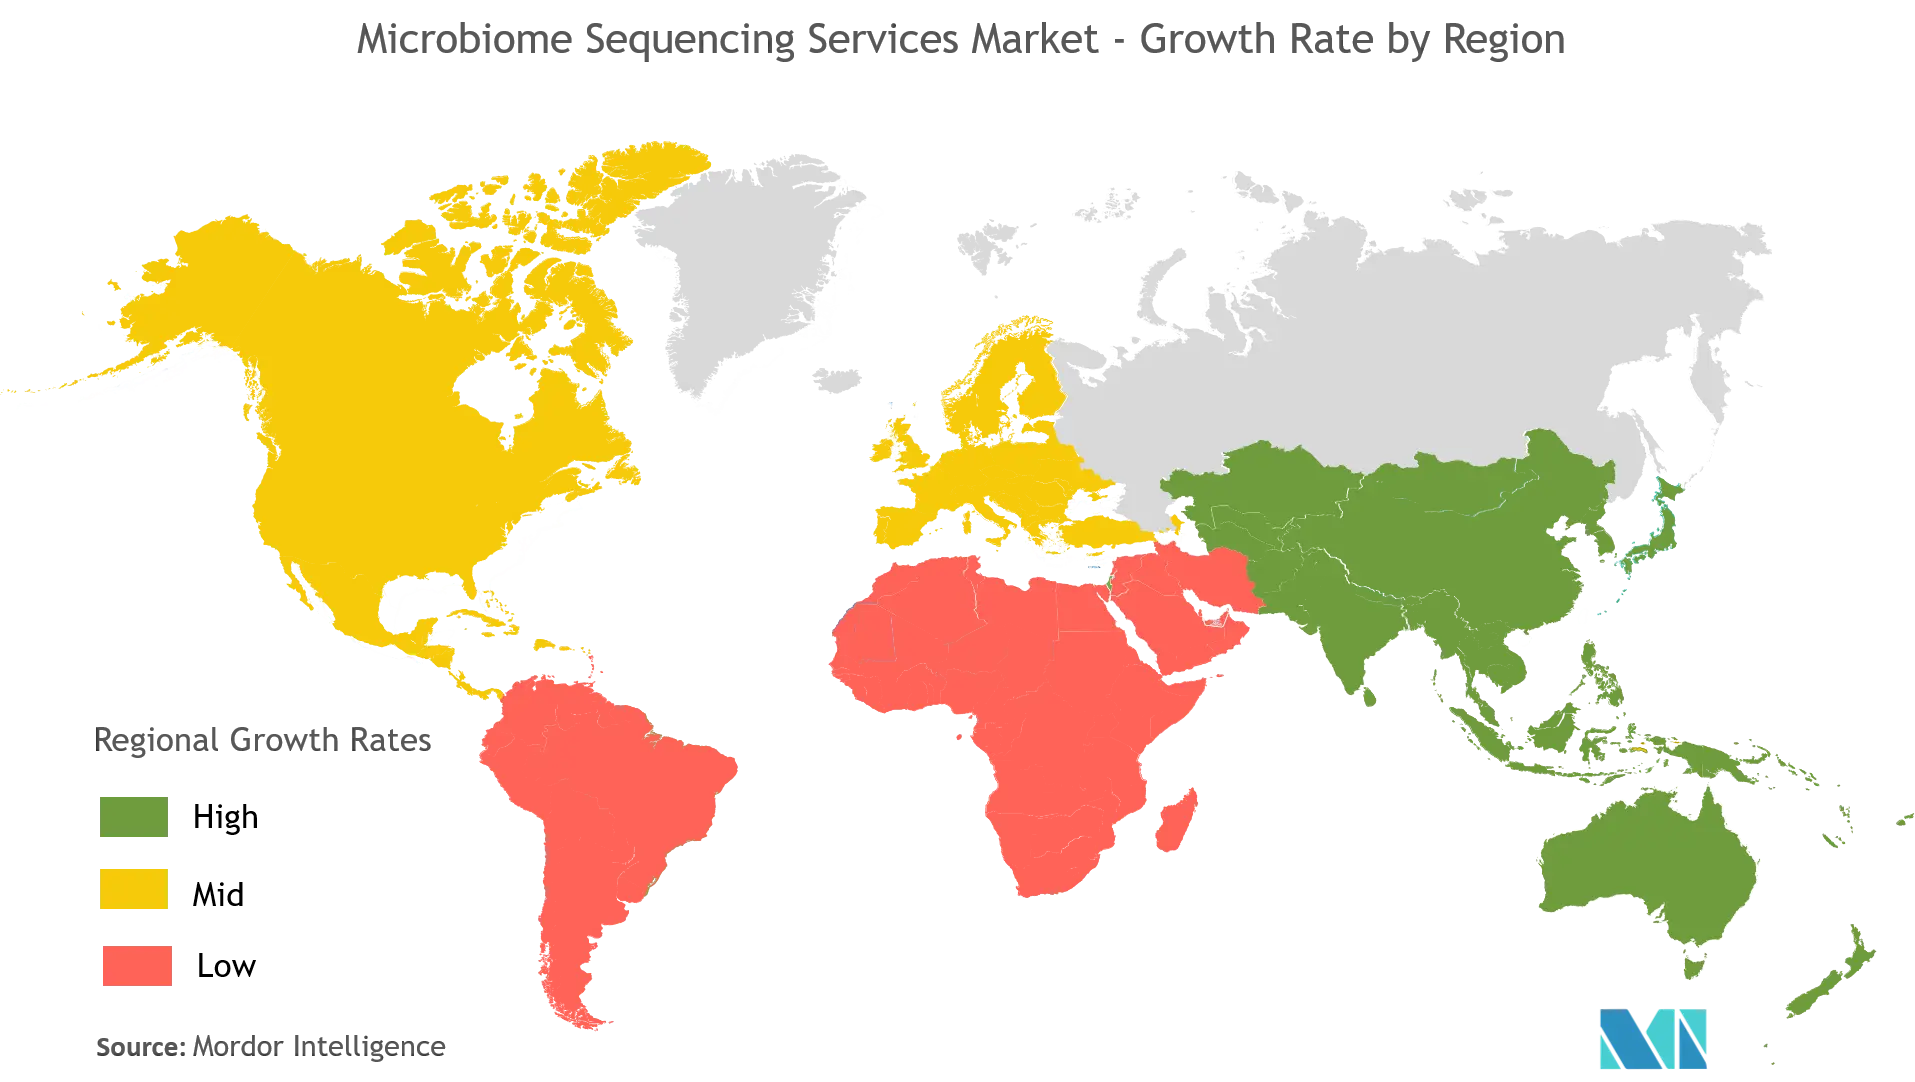 Microbiome Sequencing Services Market Growth